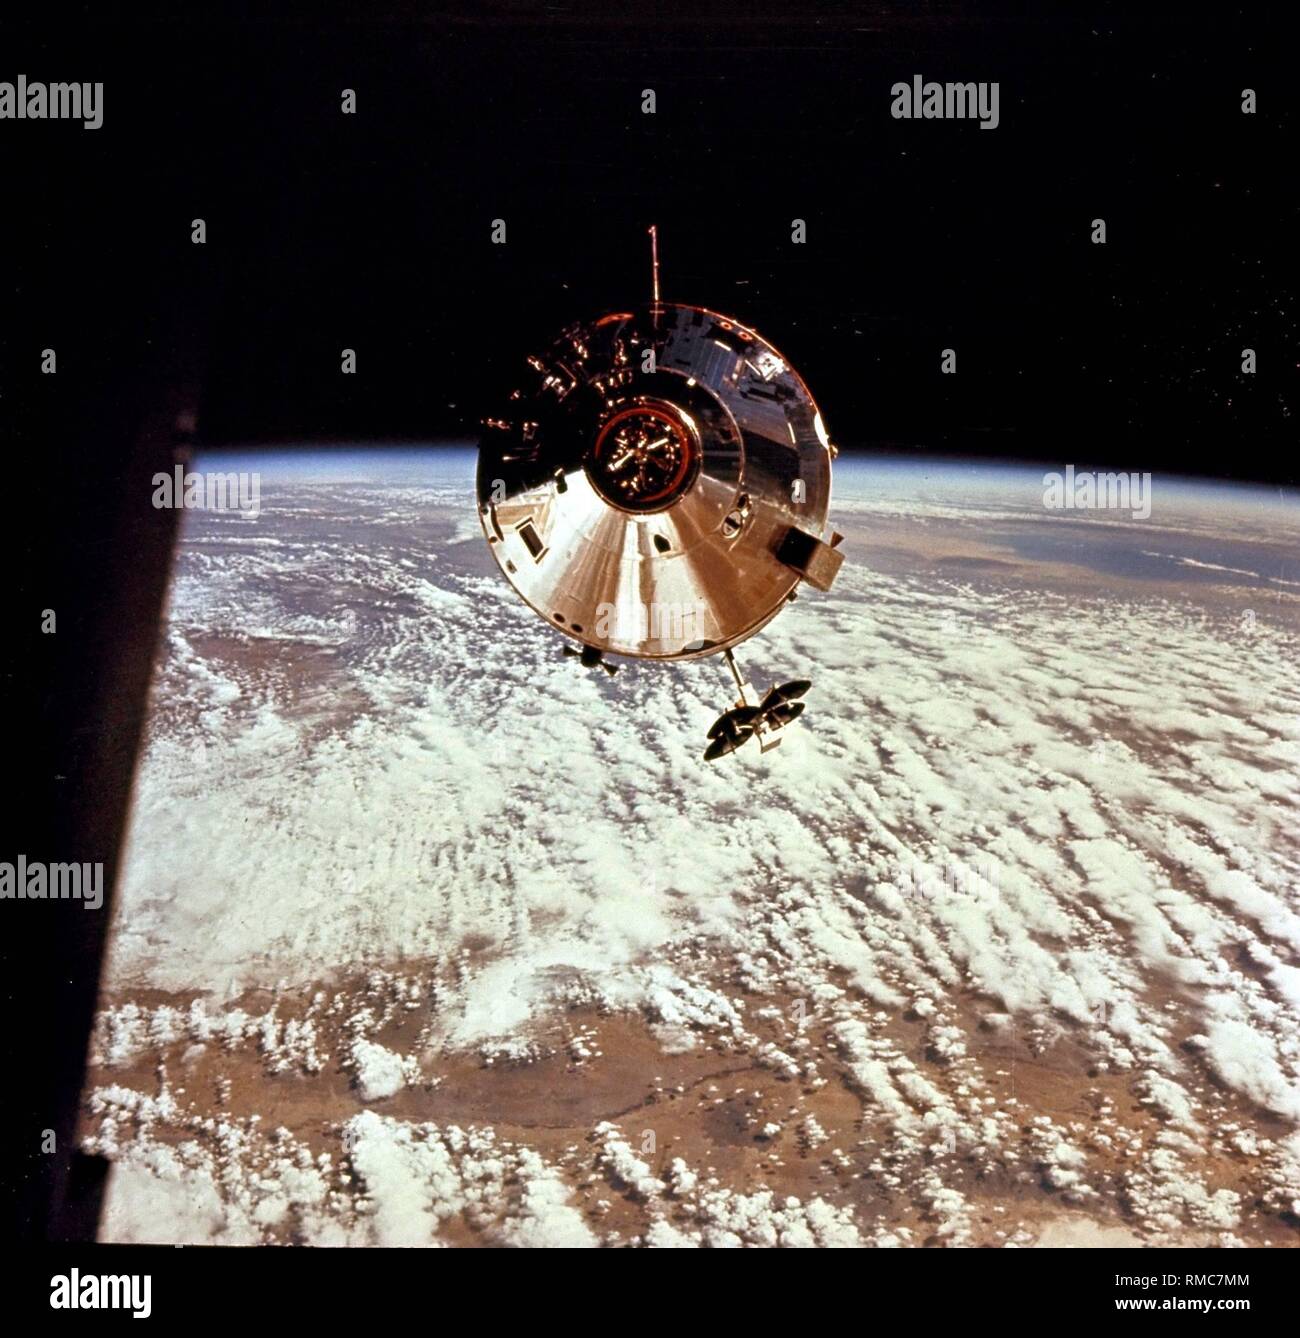 The Command Module 'Gumdrop' of the Apollo 9 mission above planet Earth photographed from the uncoupled Lunar Module 'Spider'. Apollo 9 (March 1969) was the first manned mission of an orbit around the earth that had all Apollo equipment and included the first flight of a Lunar Module. Stock Photo